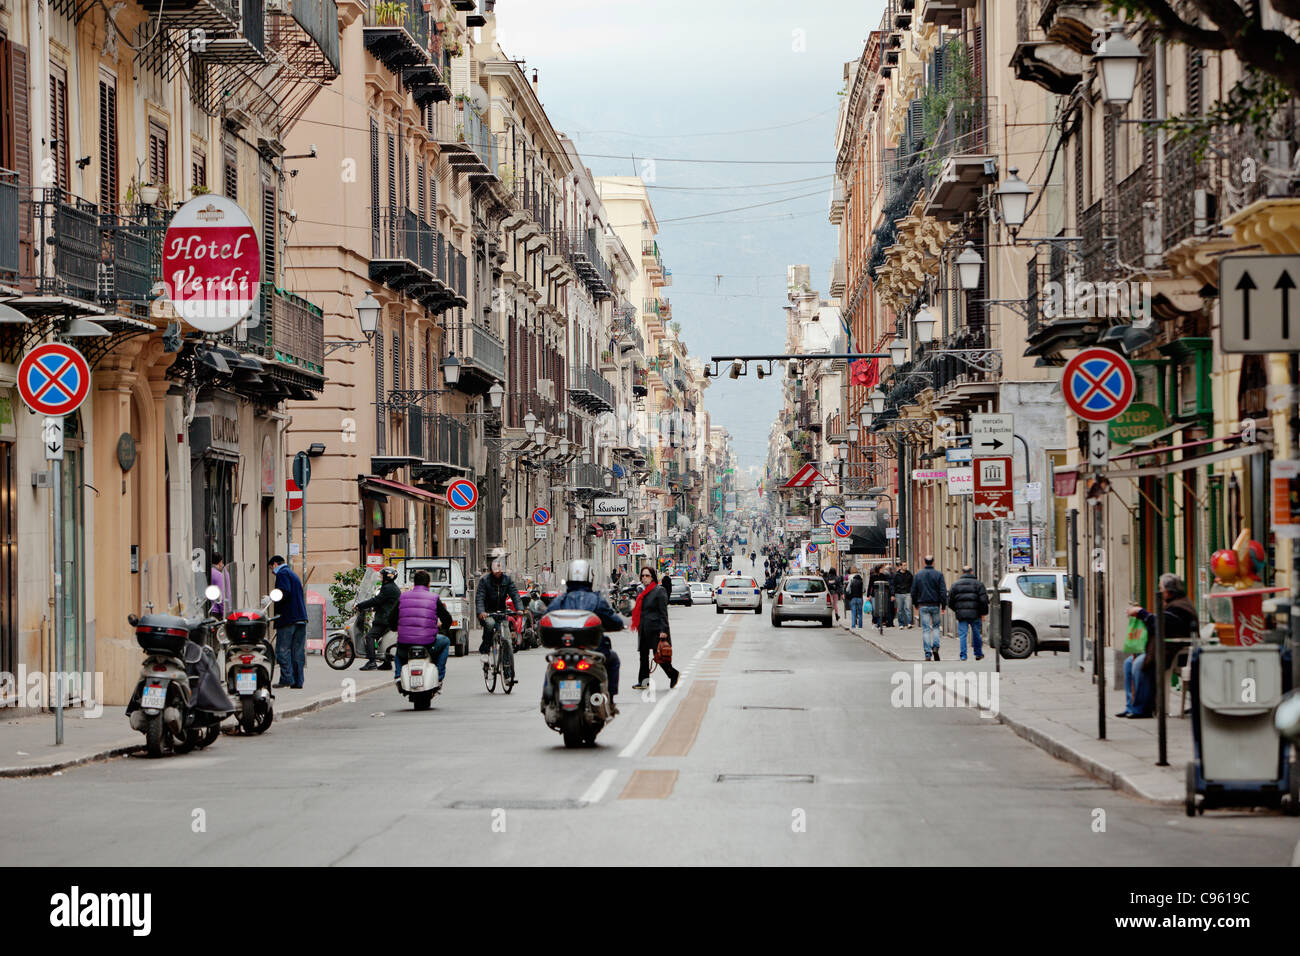 Street view in Palermo, Sicily, Italy. Stock Photo